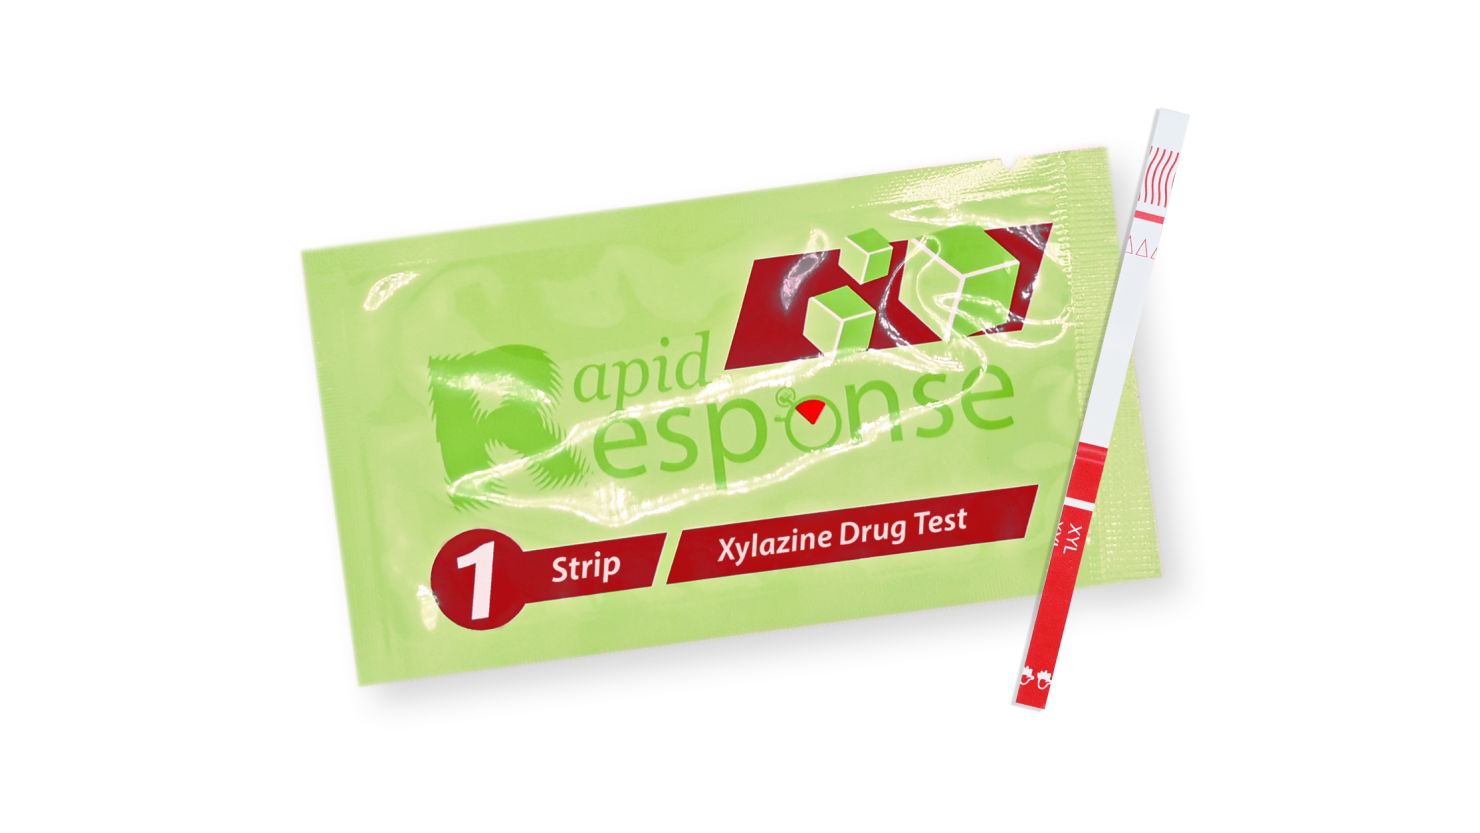 Xylazine test strips from BTNX cost $2 a test, sold in boxes of 100.